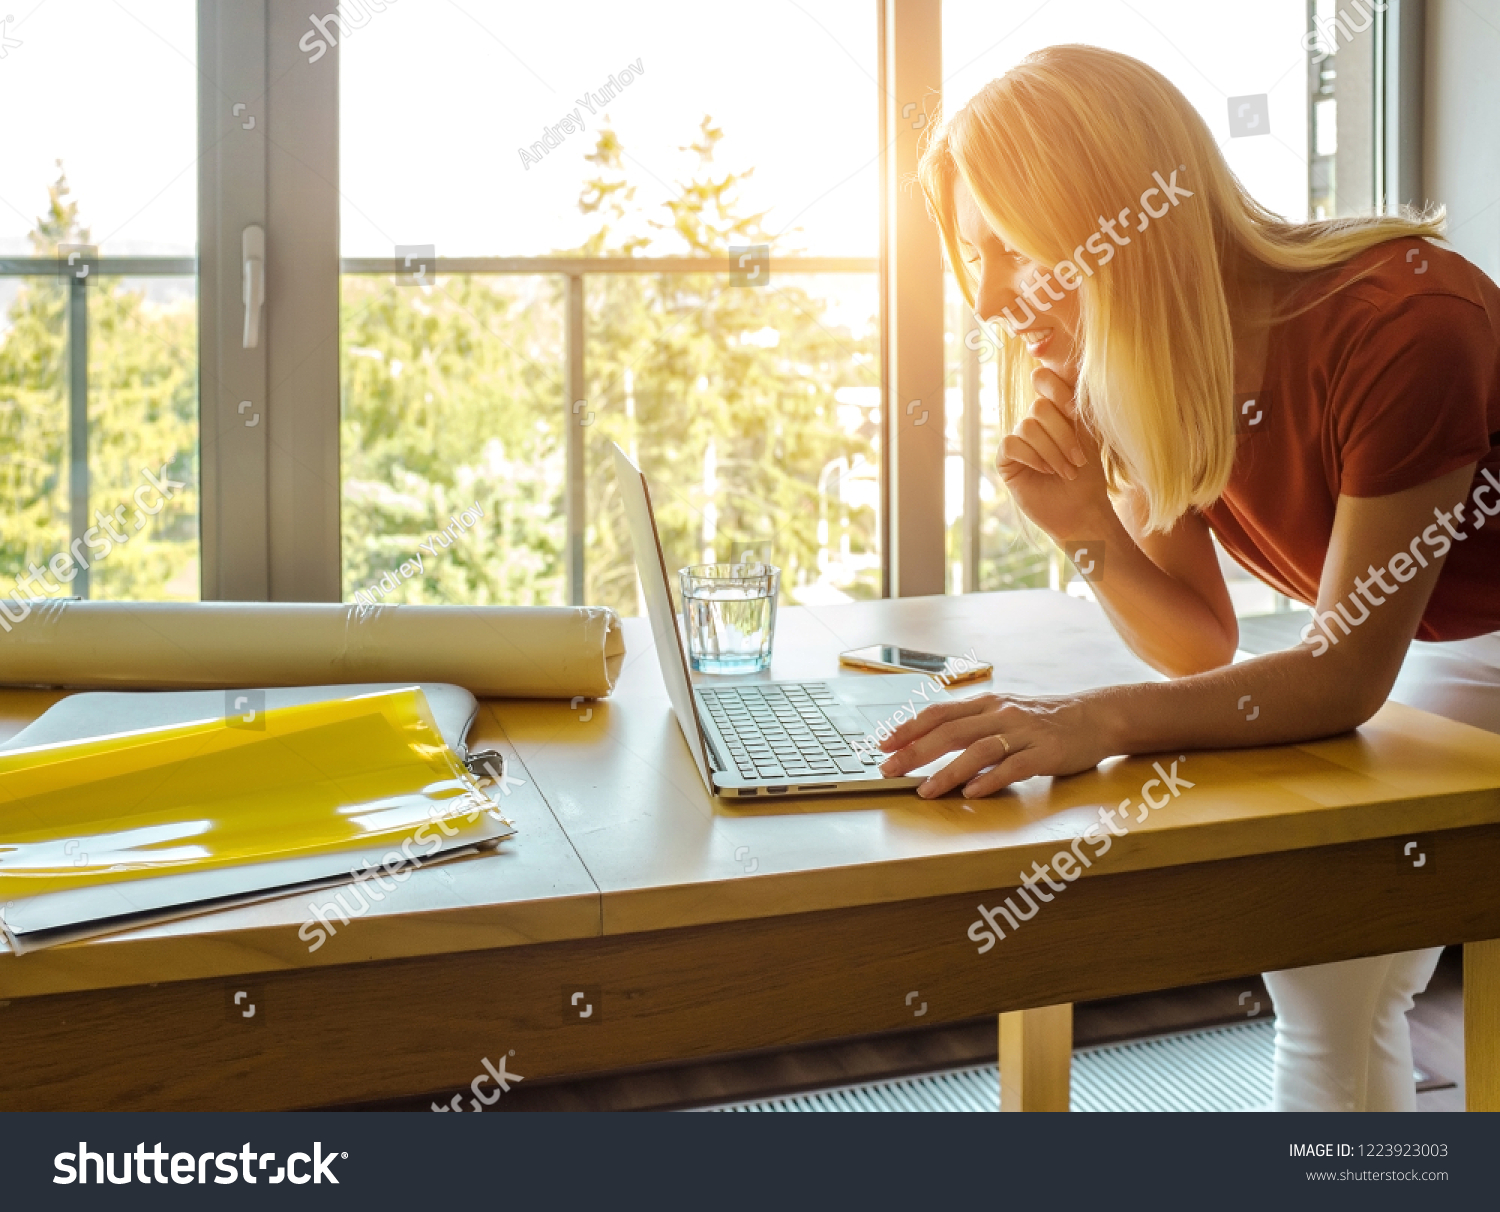 Searching for fresh ideas. Full length of young woman using computer while standing in the creative office near the window in sunny day. #1223923003